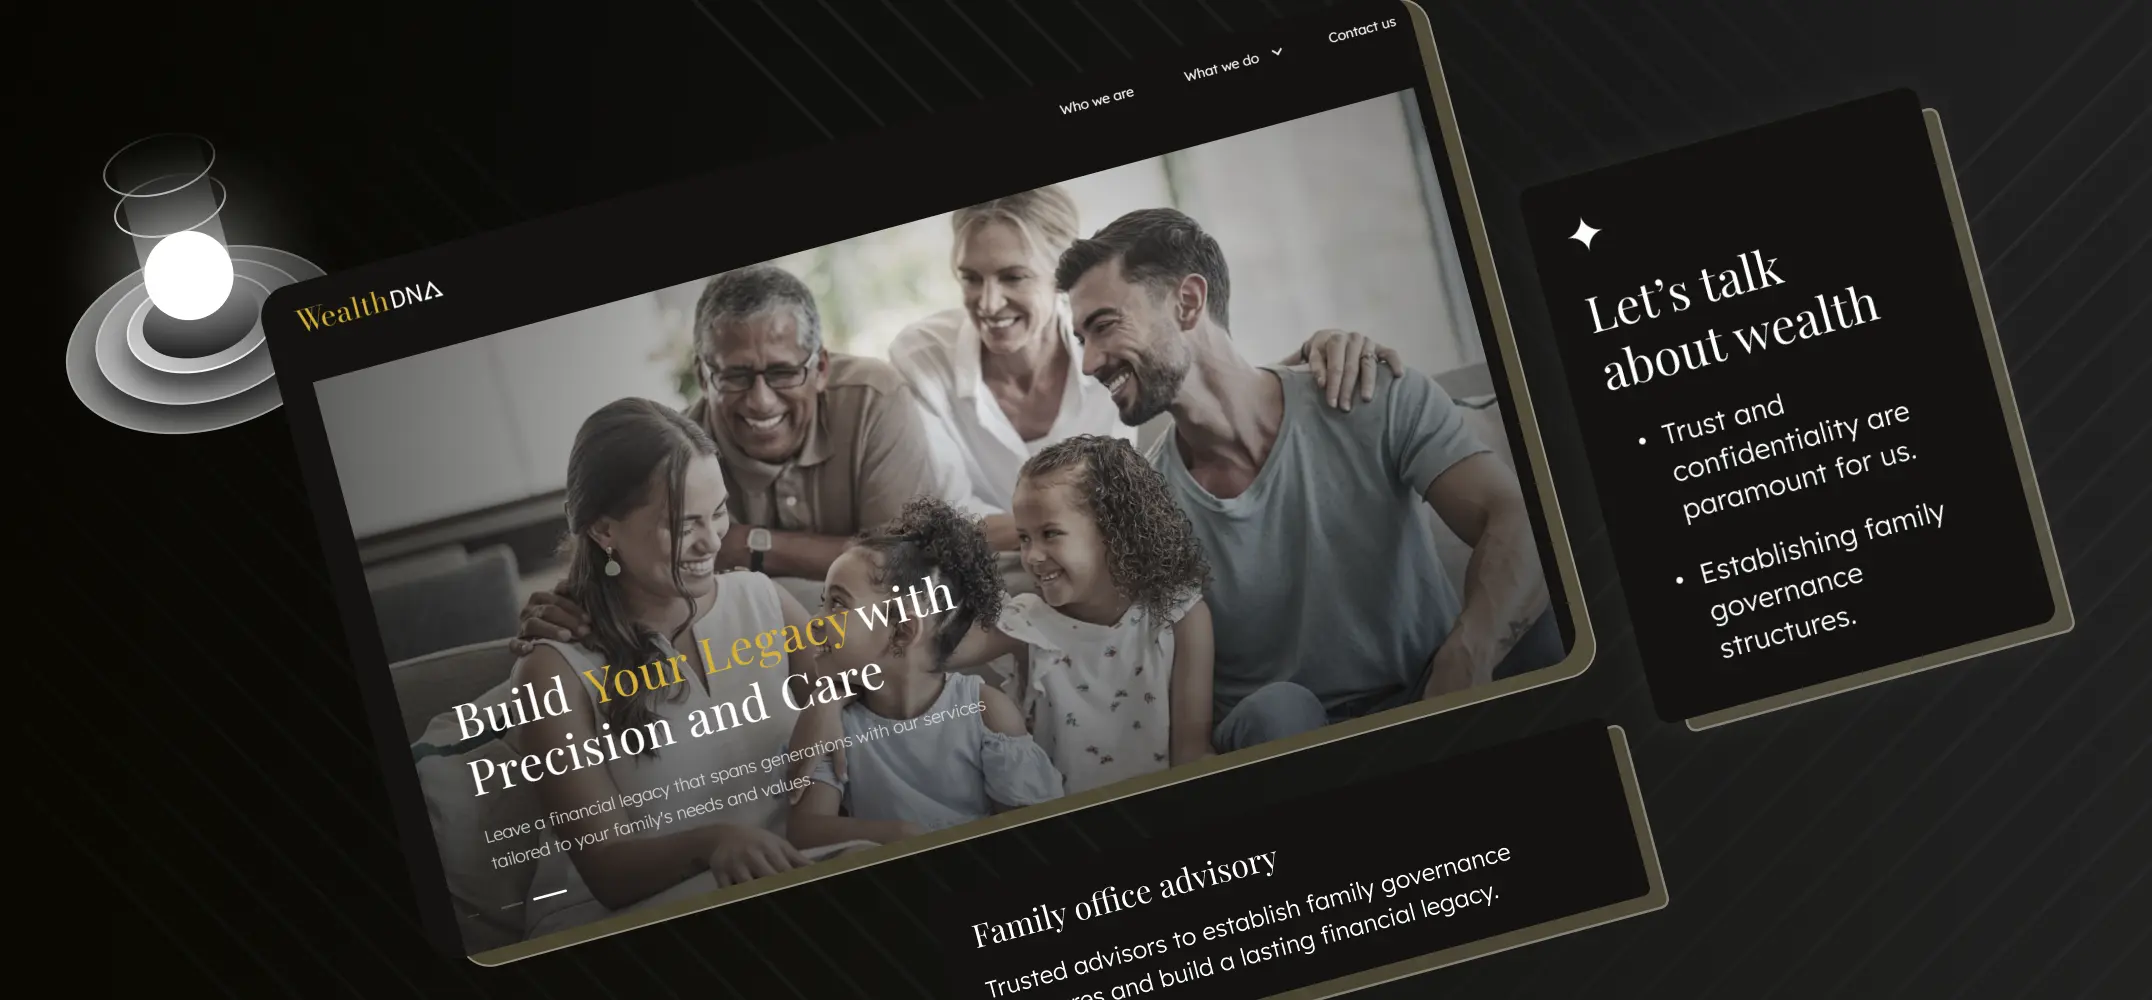 WealthDNA - Corporate website tailored to meet the multifaceted needs of family office business